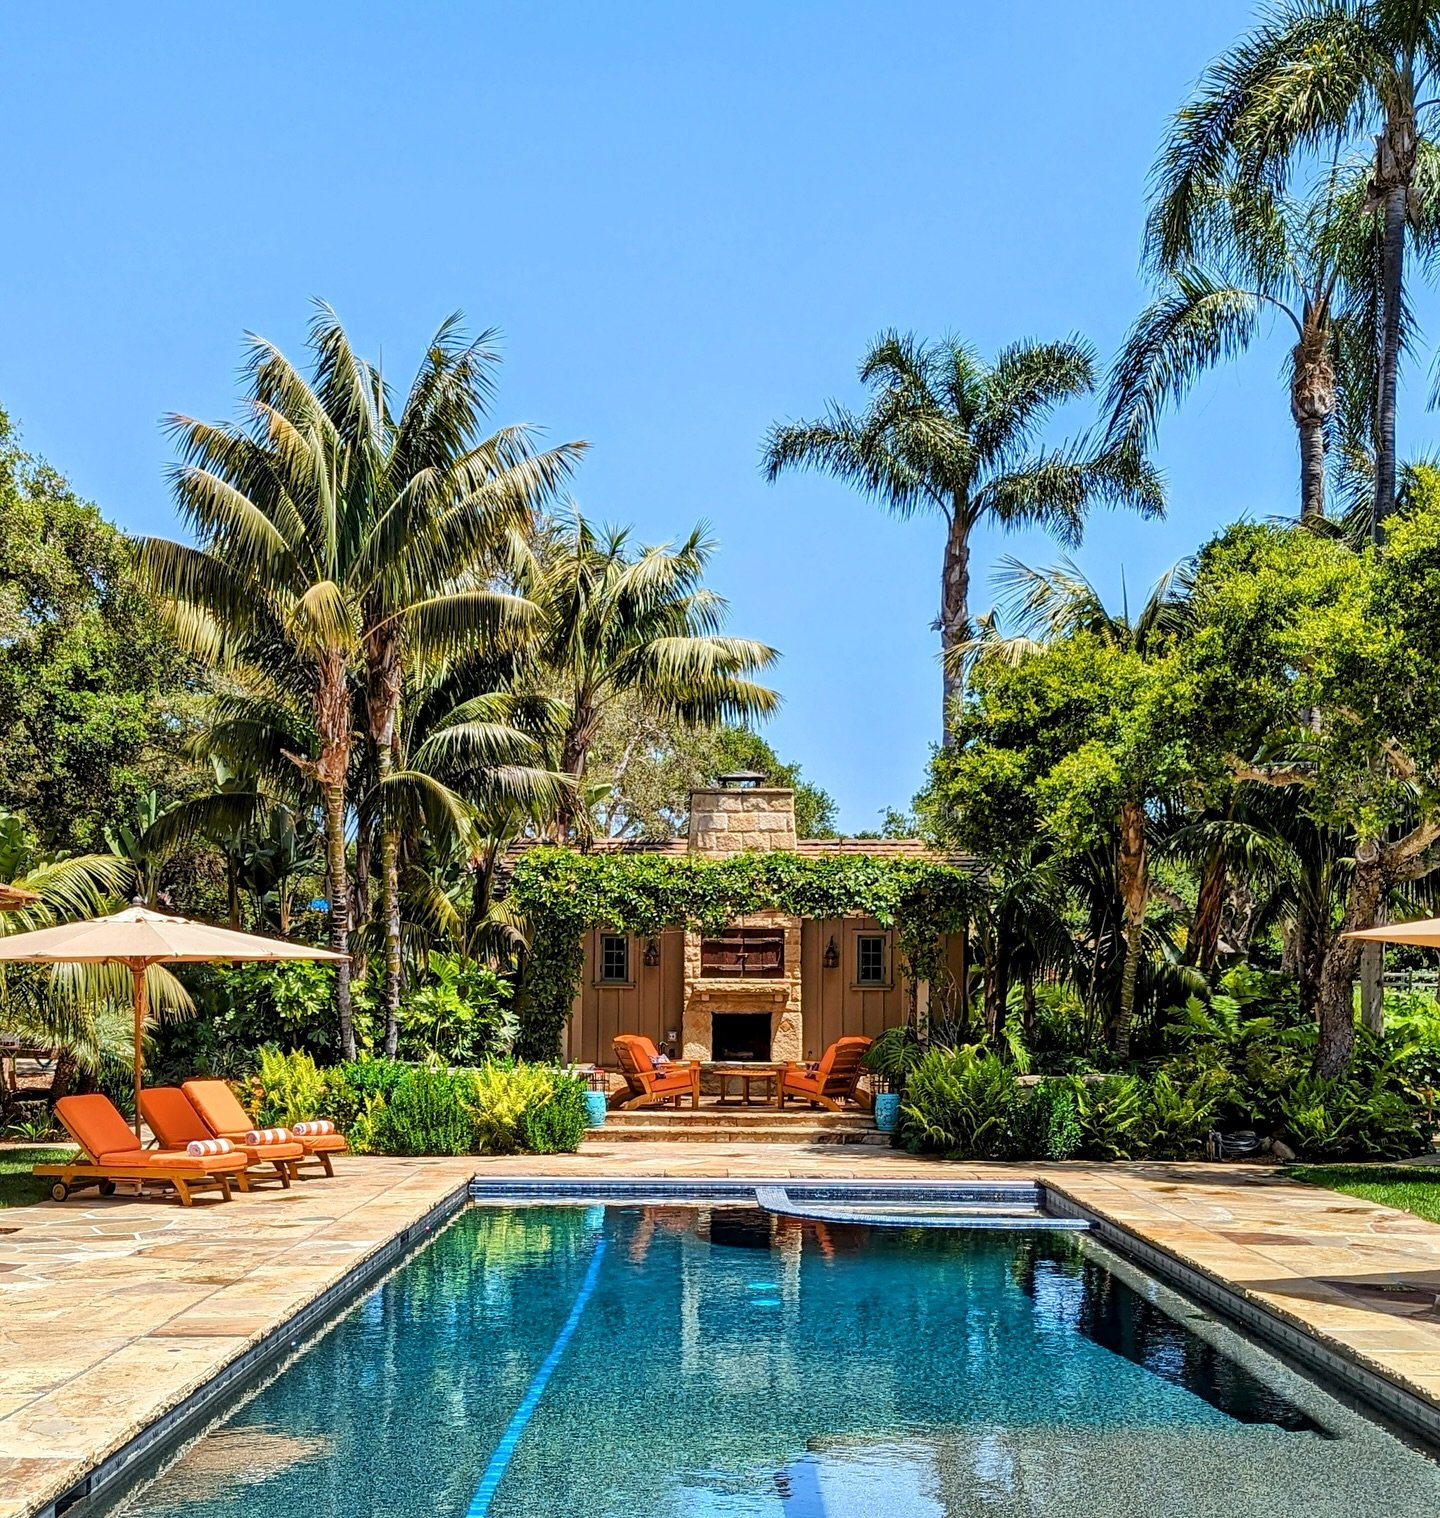 Vacations are better here! ☀️💦🌴

#SeaRanchMontecito #SeaRanch #montecito #vacationmode